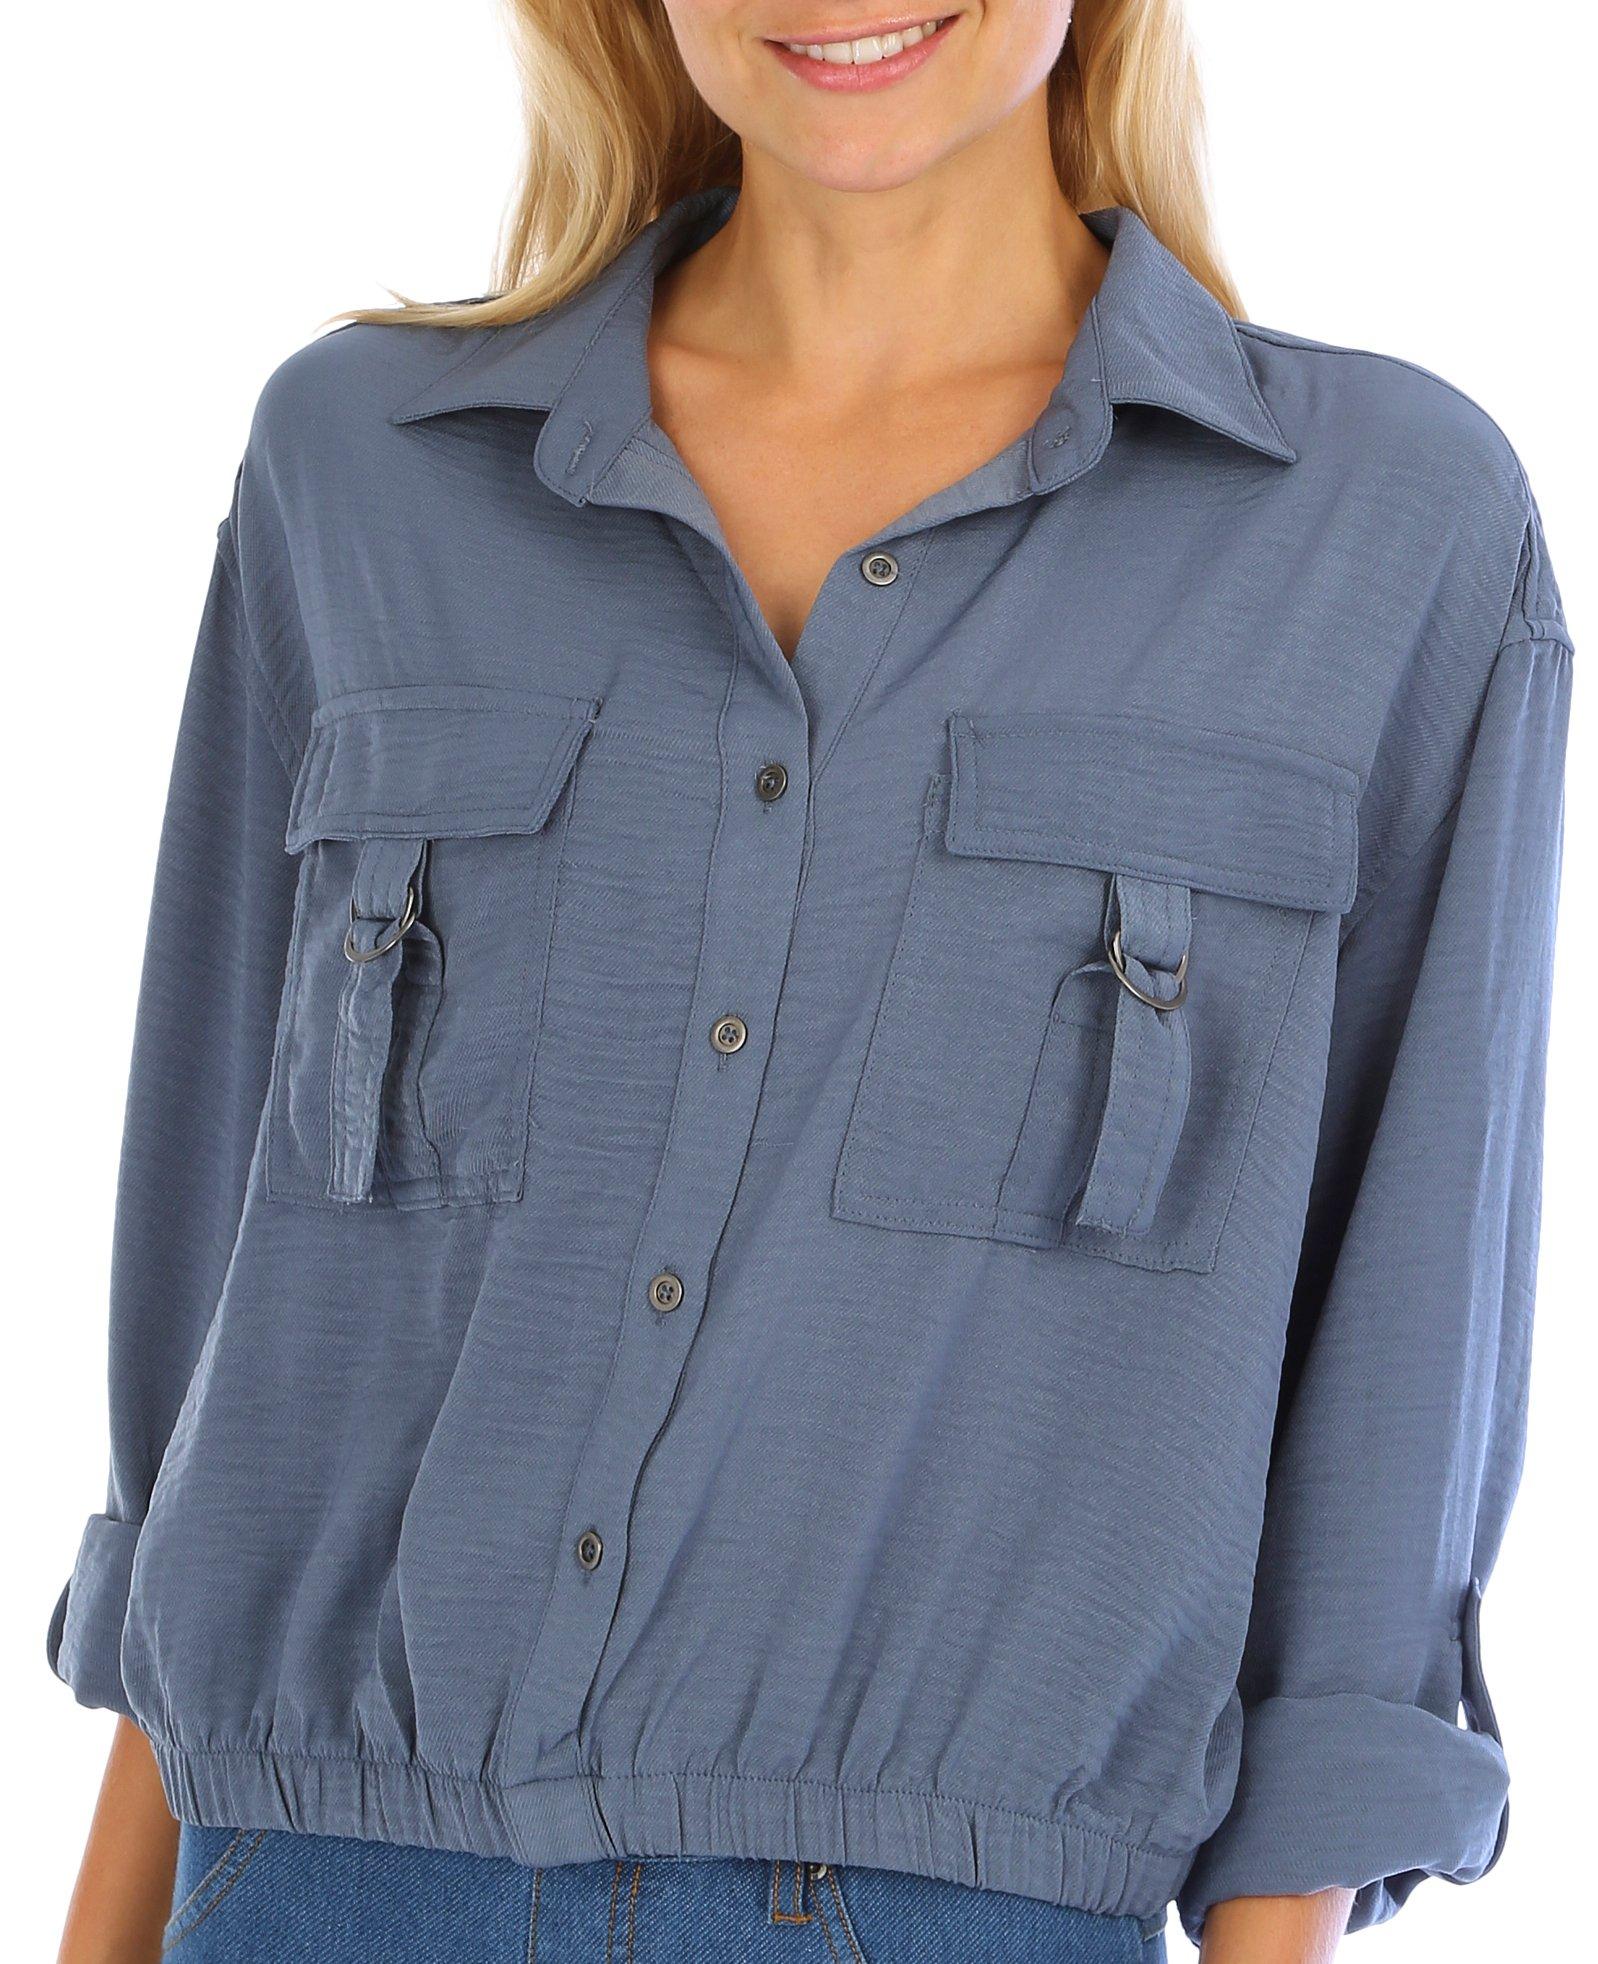 Juniors Solid Button Down Utility Pocket Top